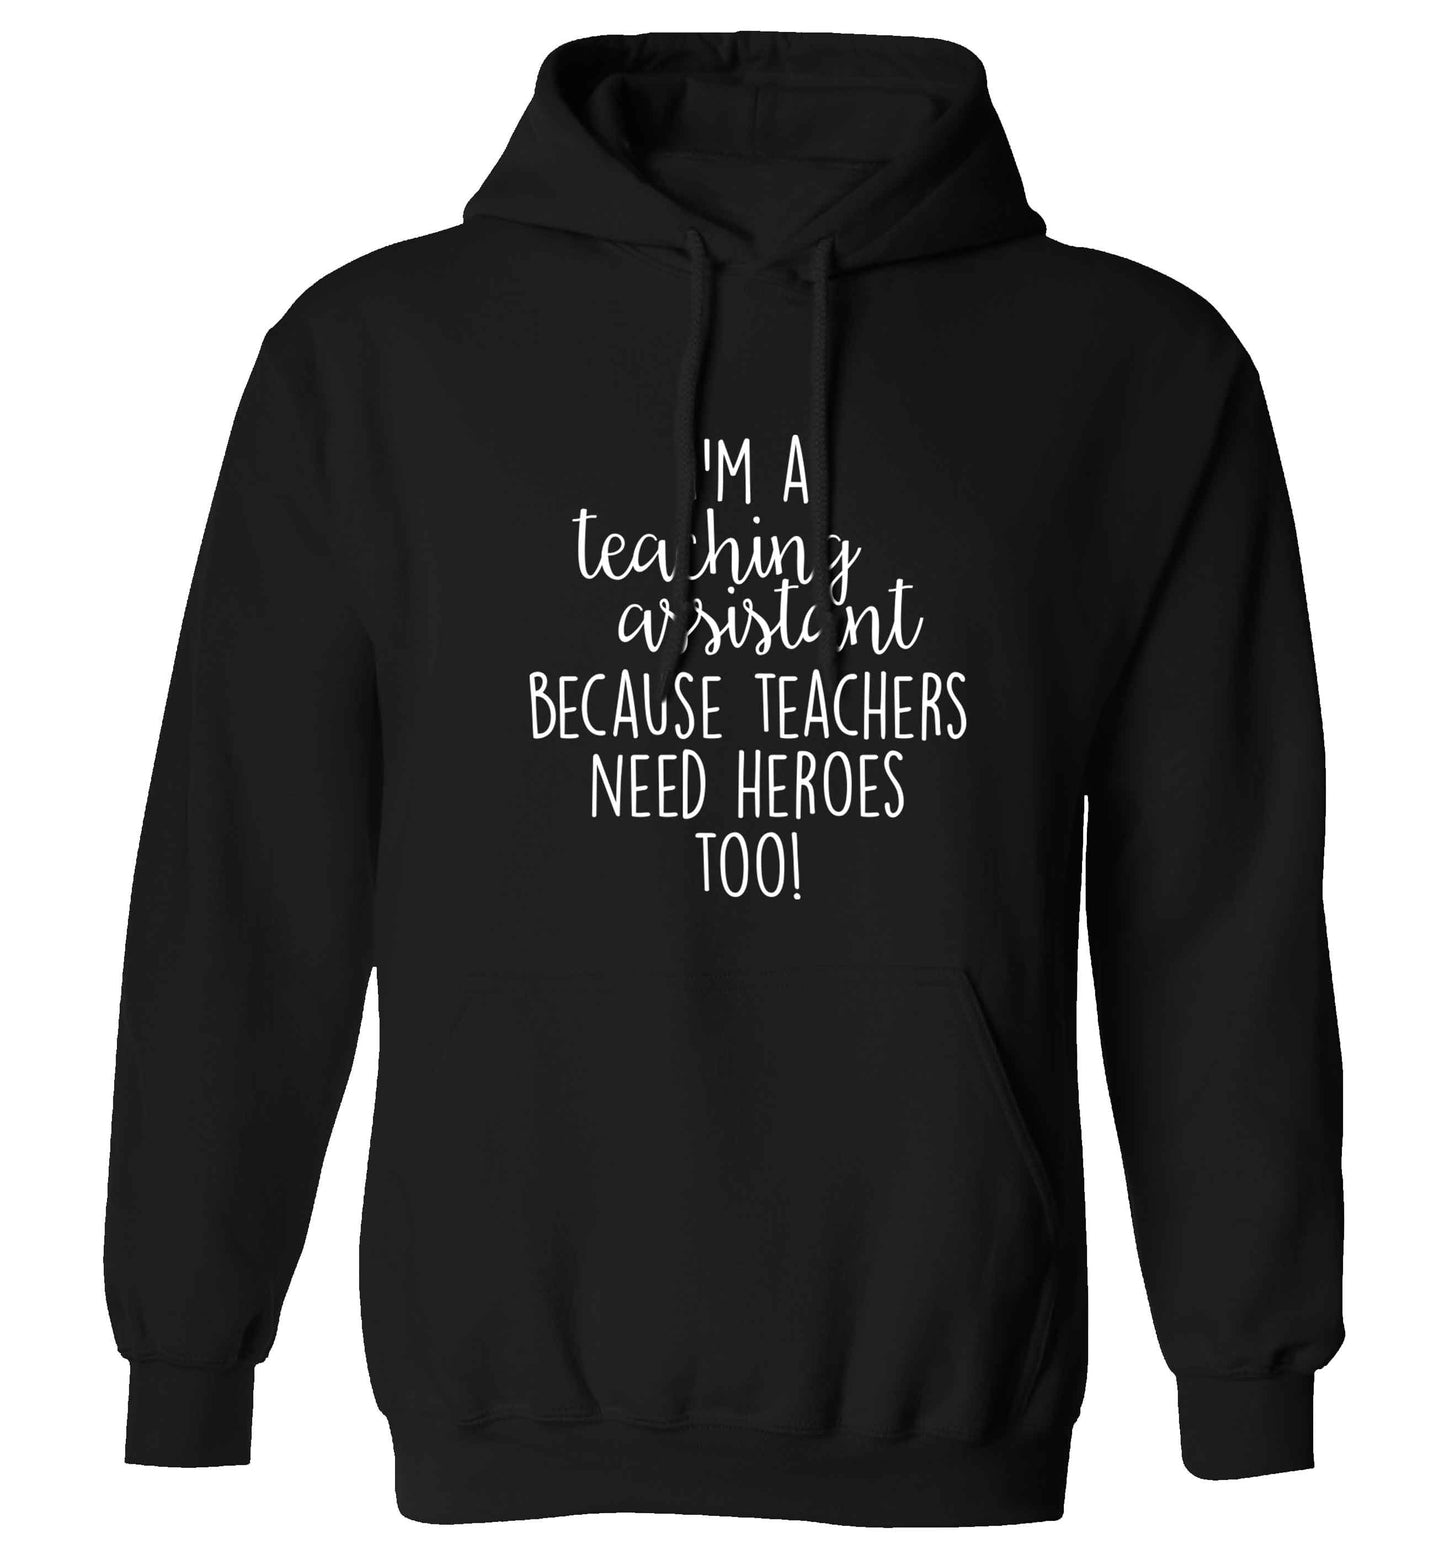 I'm a teaching assistant because teachers need heroes too! adults unisex black hoodie 2XL